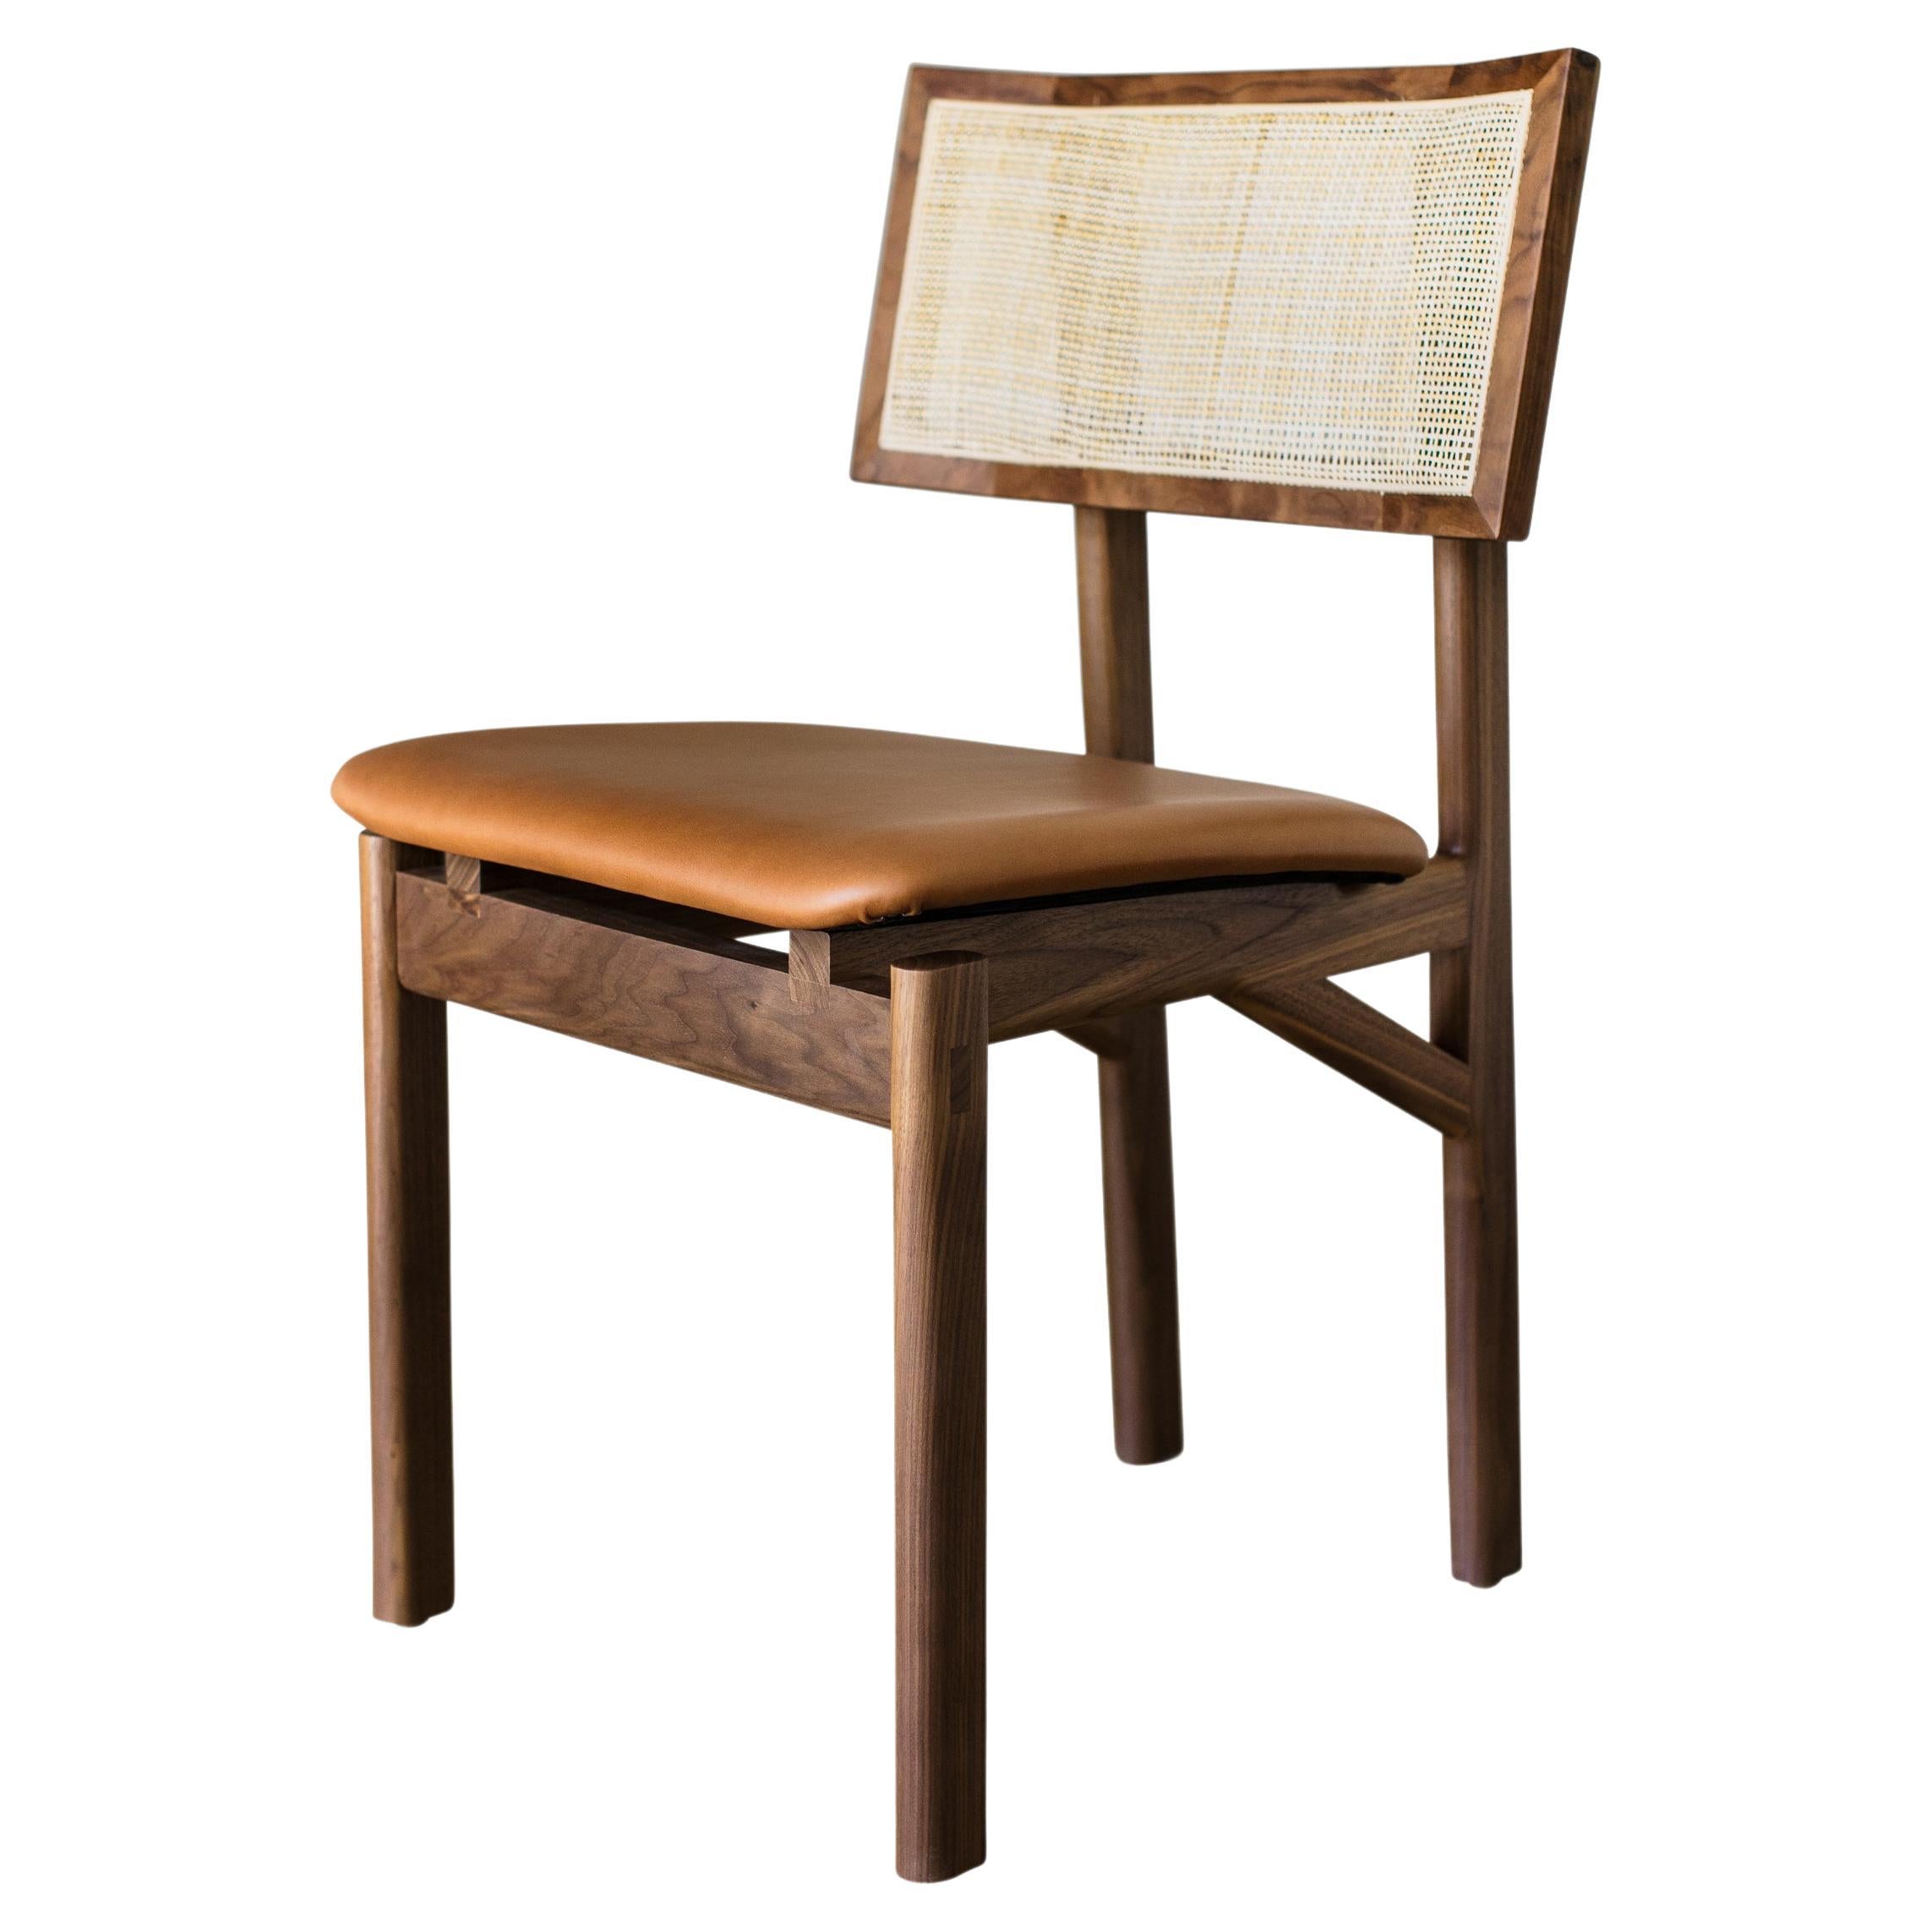 Solid wood constructed dining chair available in any American domestic hardwoods specifically walnut, oak, ebonized oak, or ash. Featuring hand-shaped legs, a custom upholstered seat available in camel leather, olive leather, black leather, vegtan